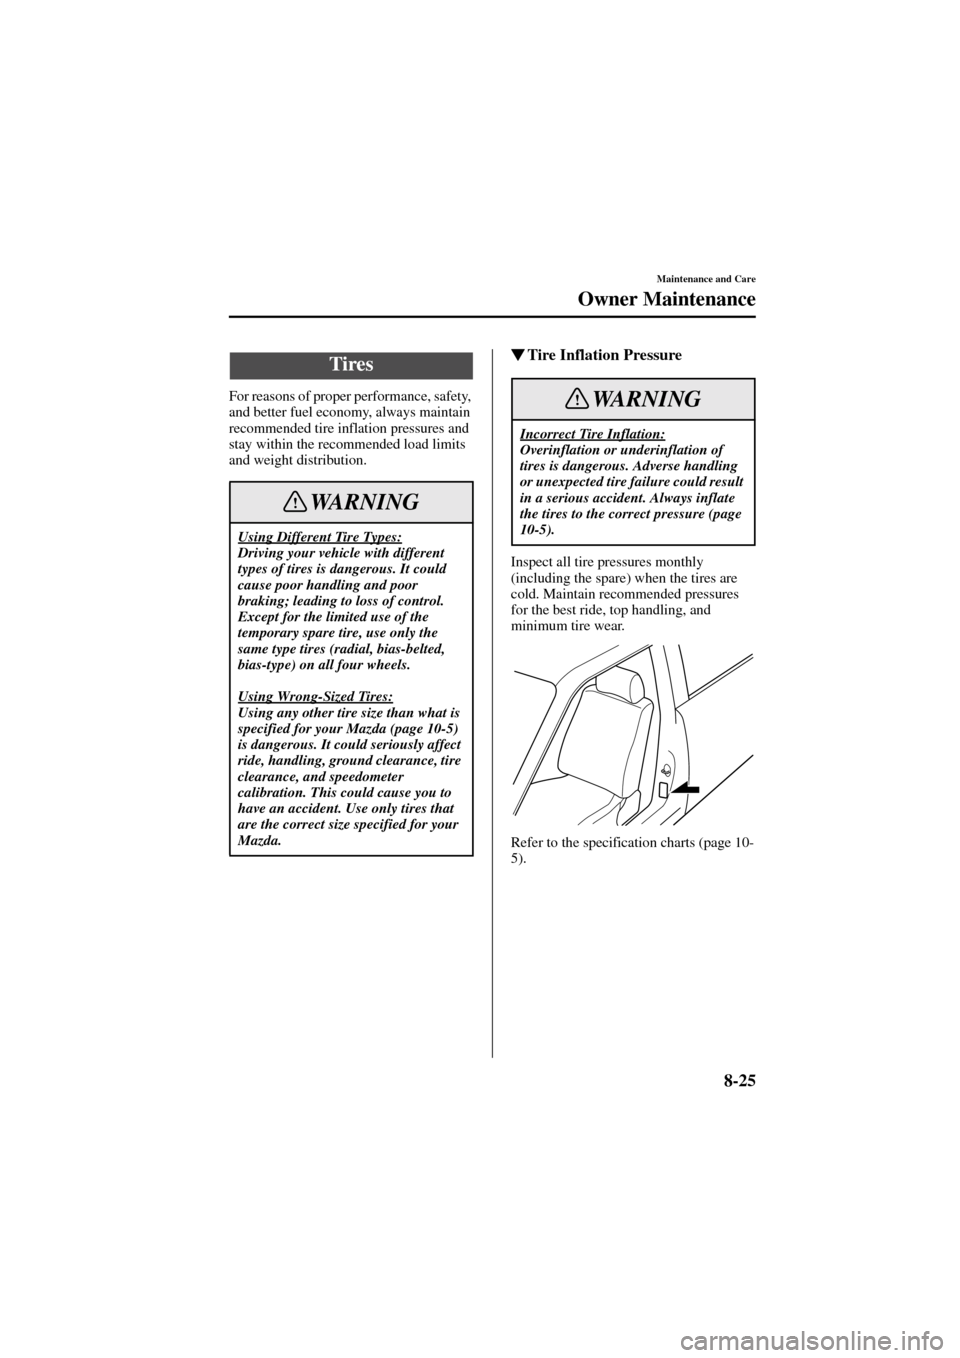 MAZDA MODEL 6 2004  Owners Manual (in English) 8-25
Maintenance and Care
Owner Maintenance
Form No. 8R29-EA-02I
For reasons of proper performance, safety, 
and better fuel economy, always maintain 
recommended tire inflation pressures and 
stay wi